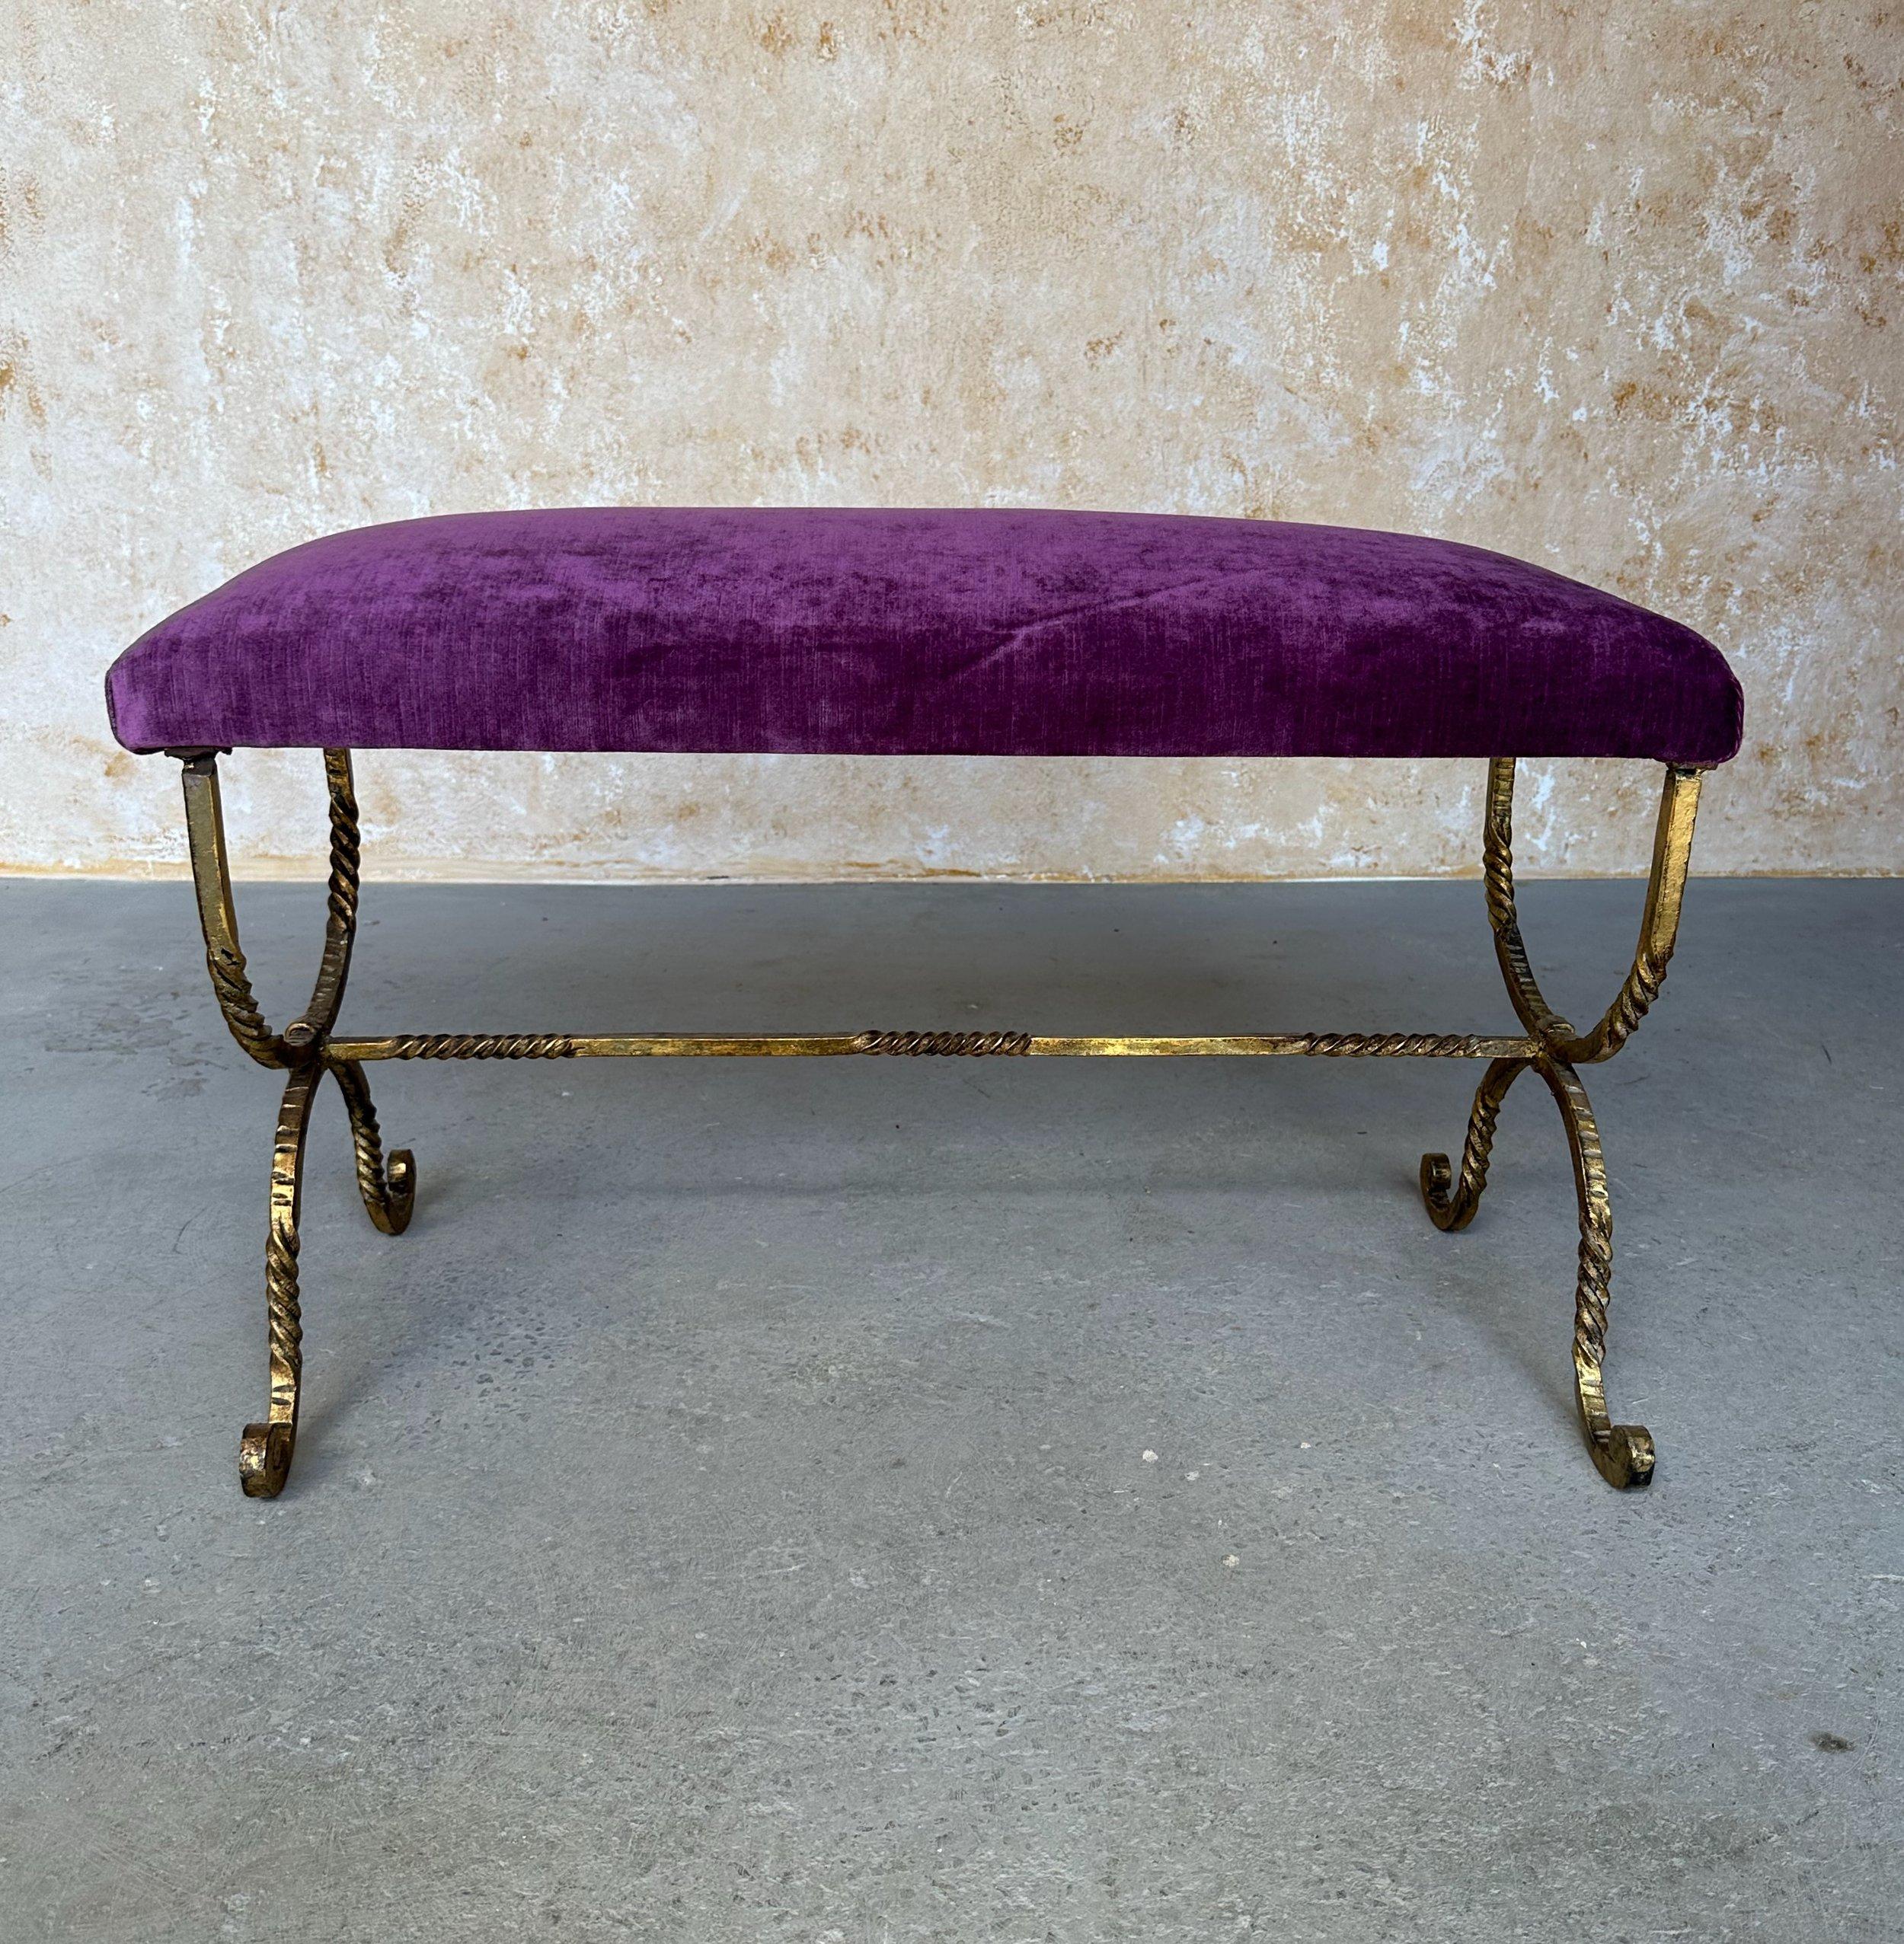 Vintage Spanish Gilt Iron Bench with Ornate Twisted Frame In Good Condition For Sale In Buchanan, NY